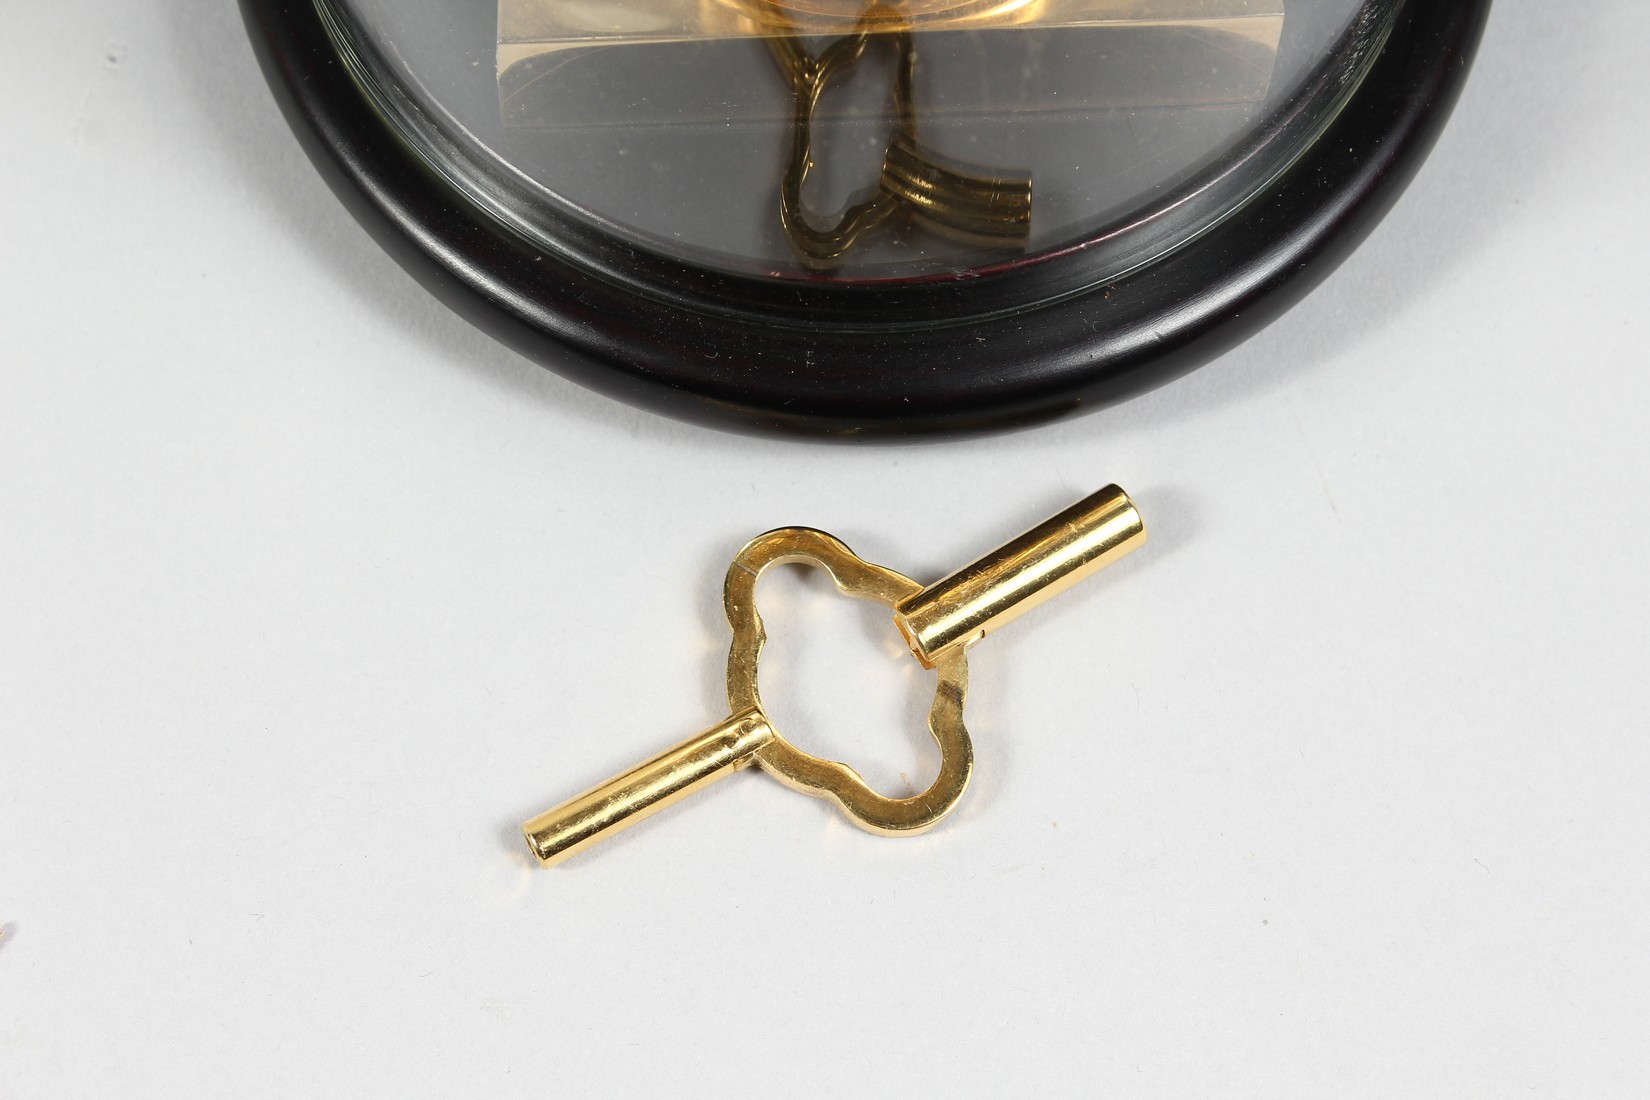 AN UNUSUAL BRASS COLUMN CLOCK with enamel dial, large spring driven movement, under a glass dome. - Image 4 of 4